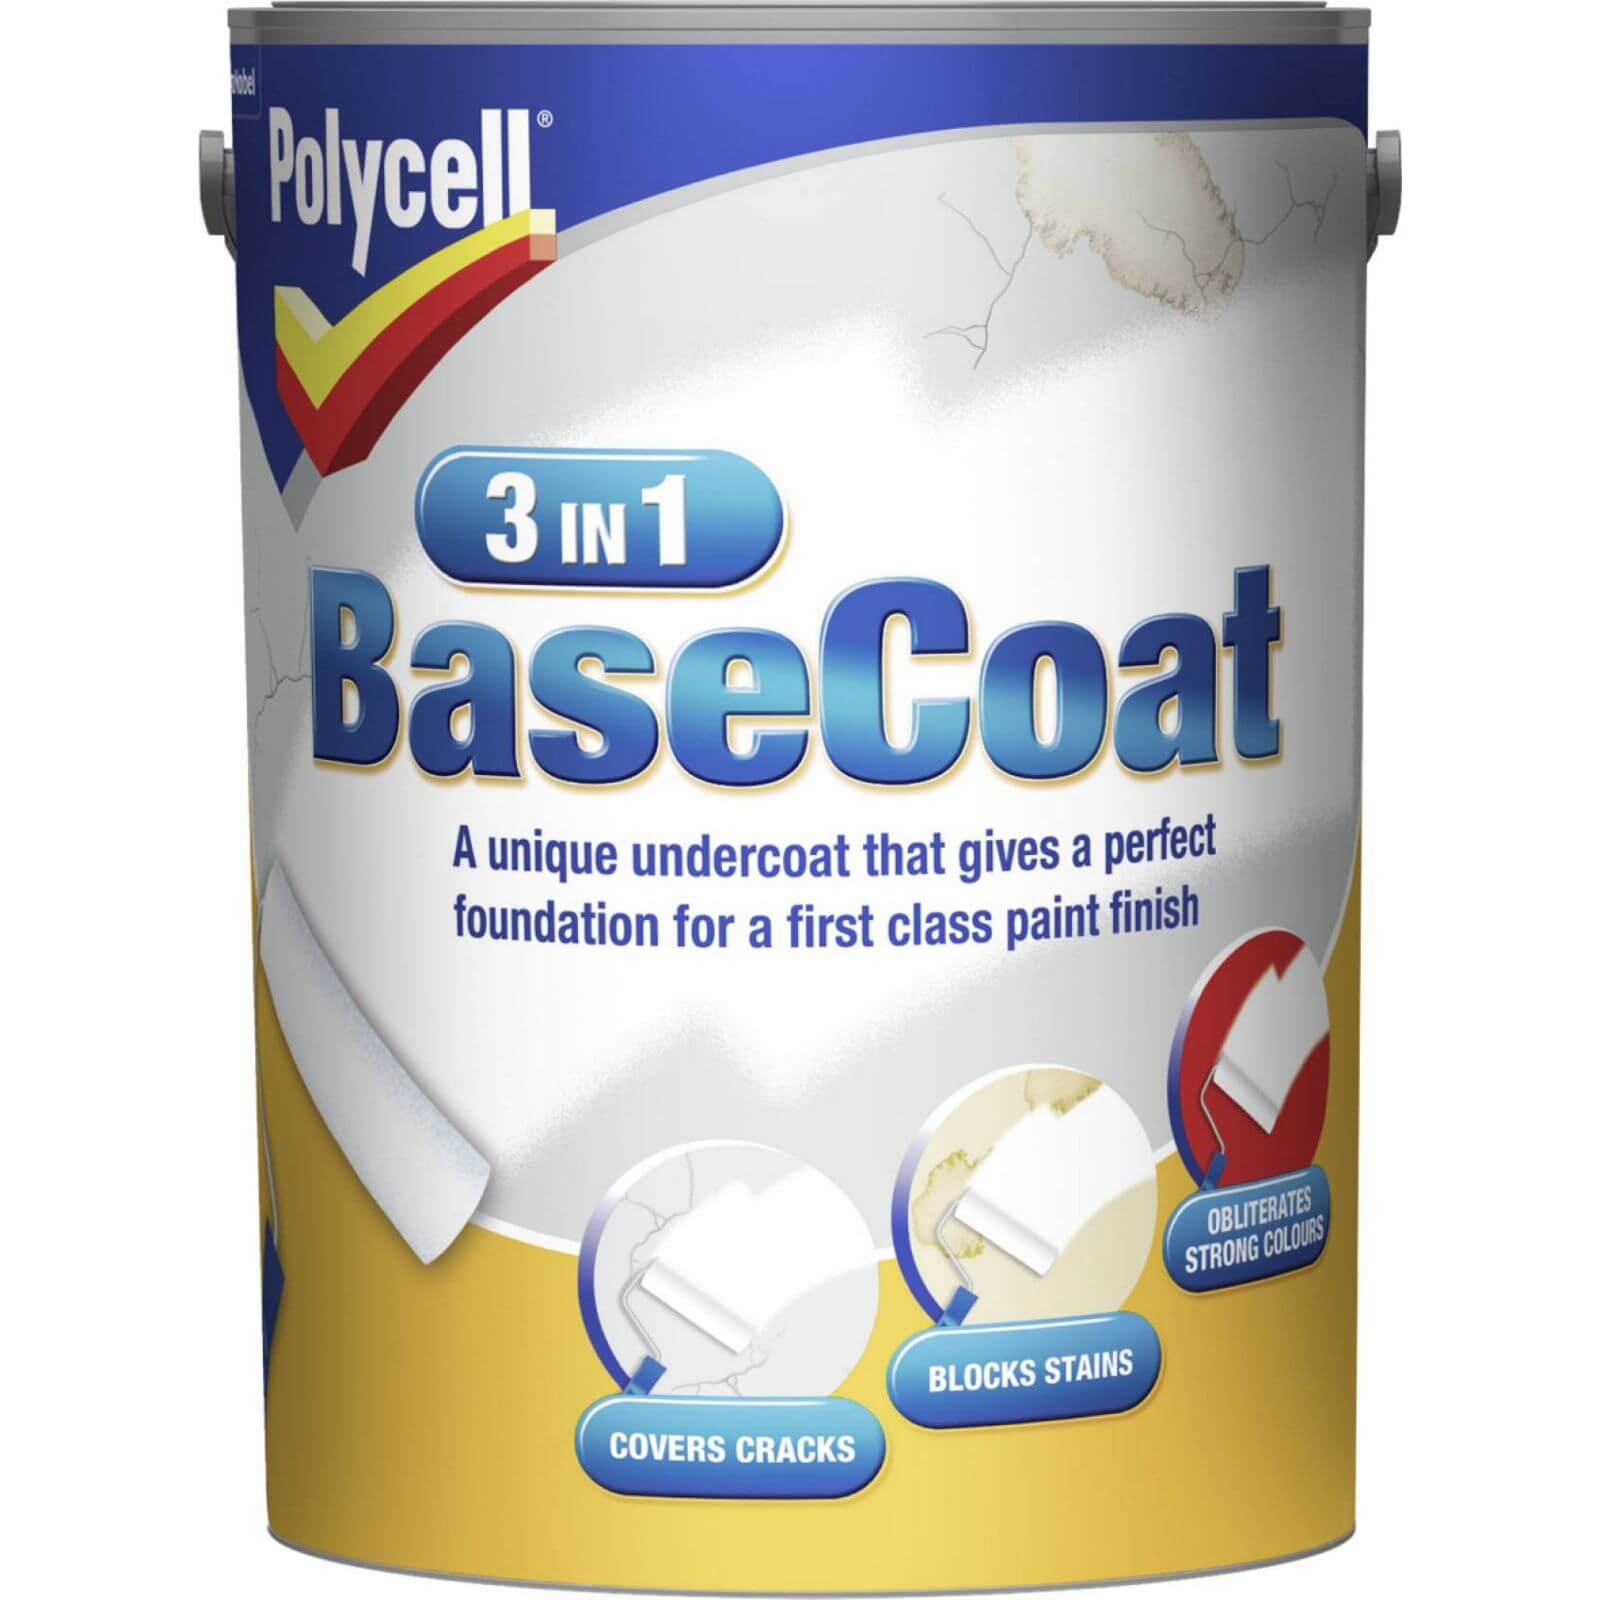 Photo of Polycell 3 In 1 Basecoat - 5l